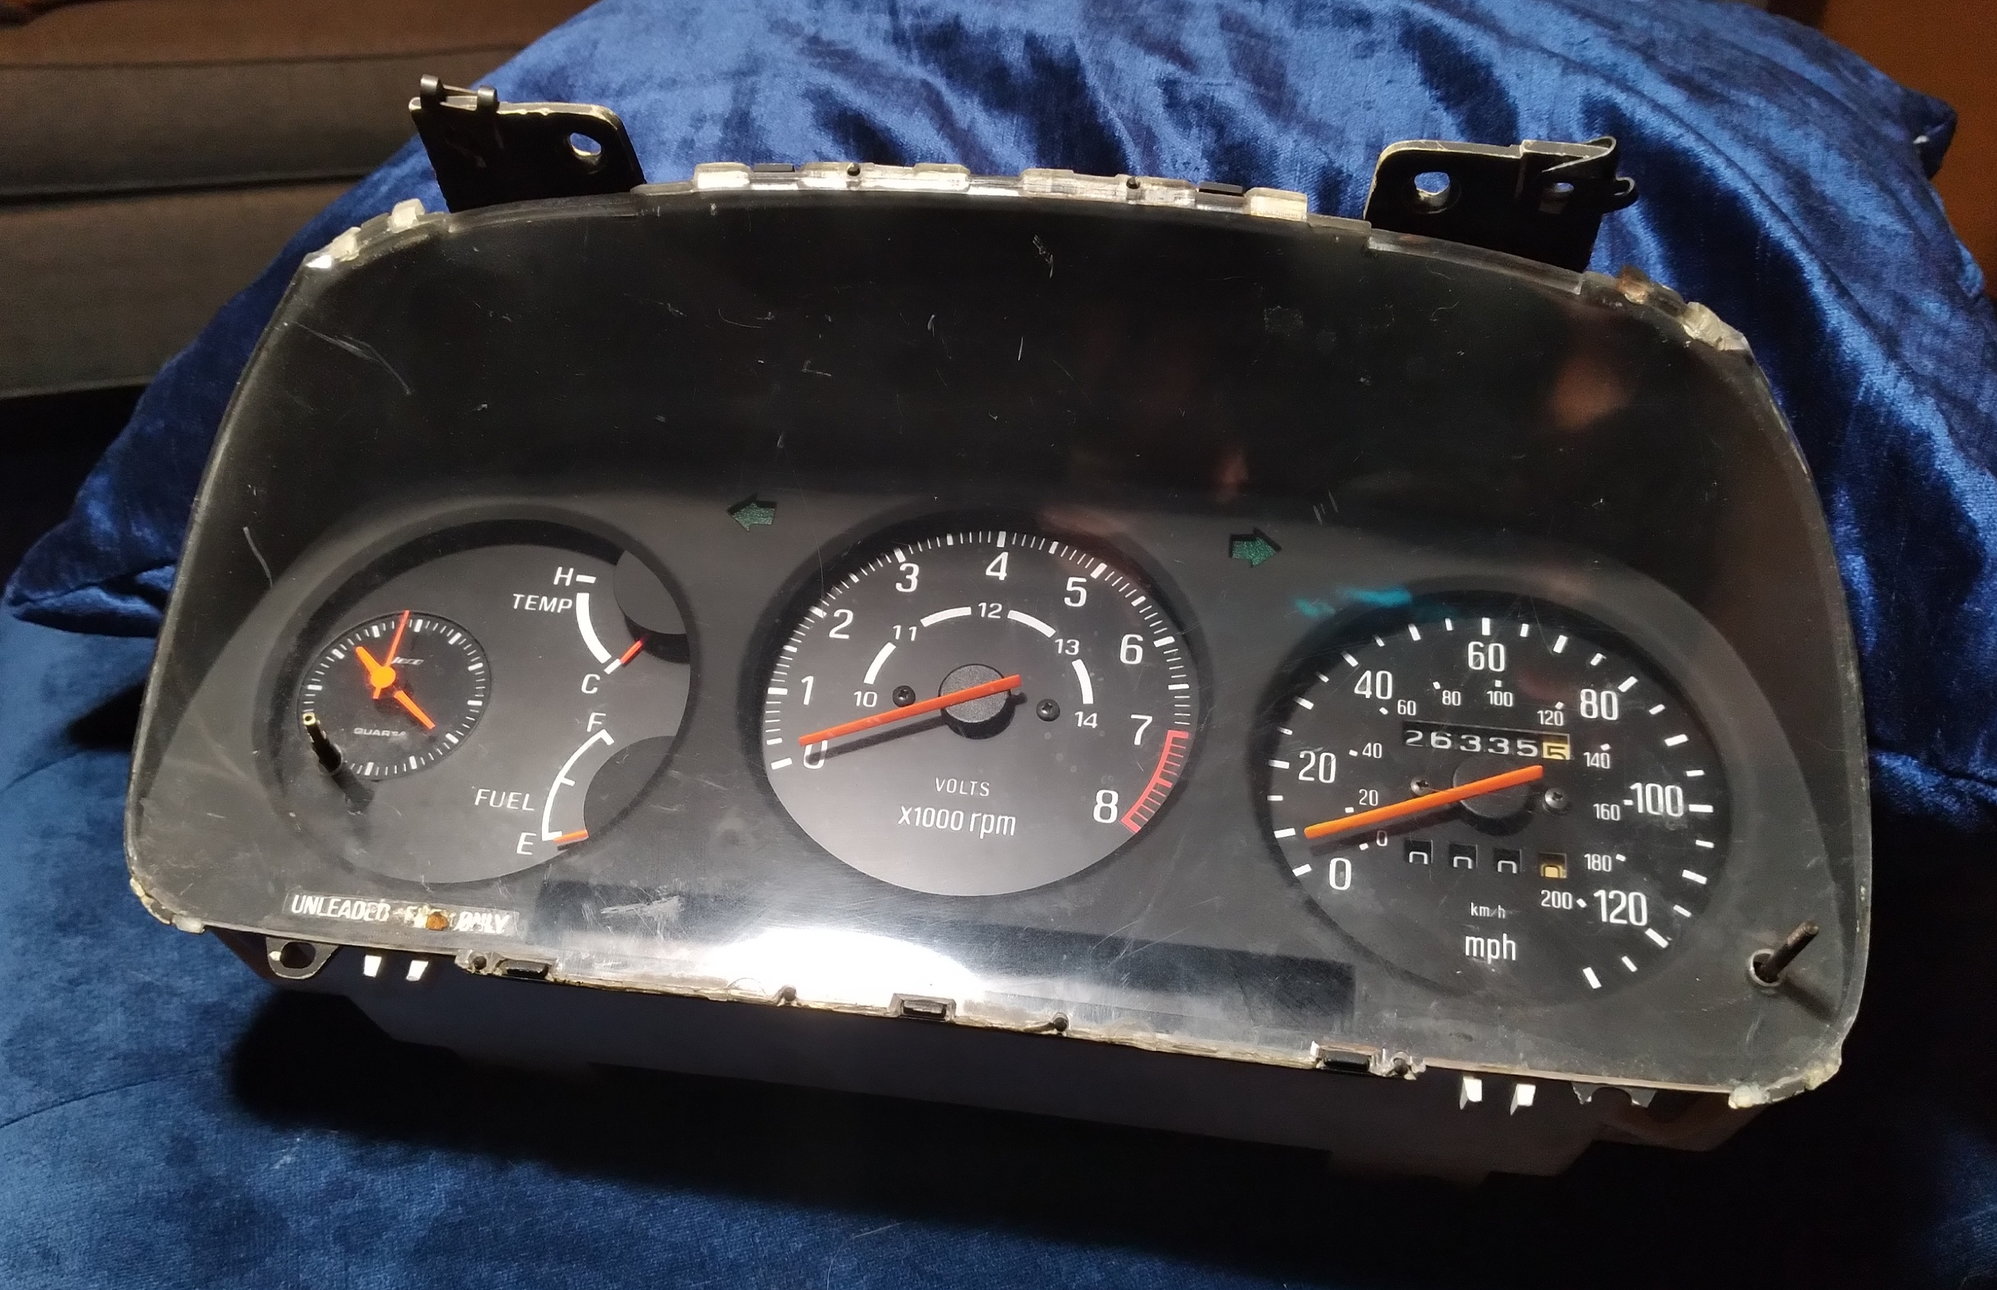 Audio Video/Electronics - 1979-80 RX7 instrument Cluster/Speedometer - Used - 1979 to 1980 Mazda RX-7 - Savannah, GA 31406, United States